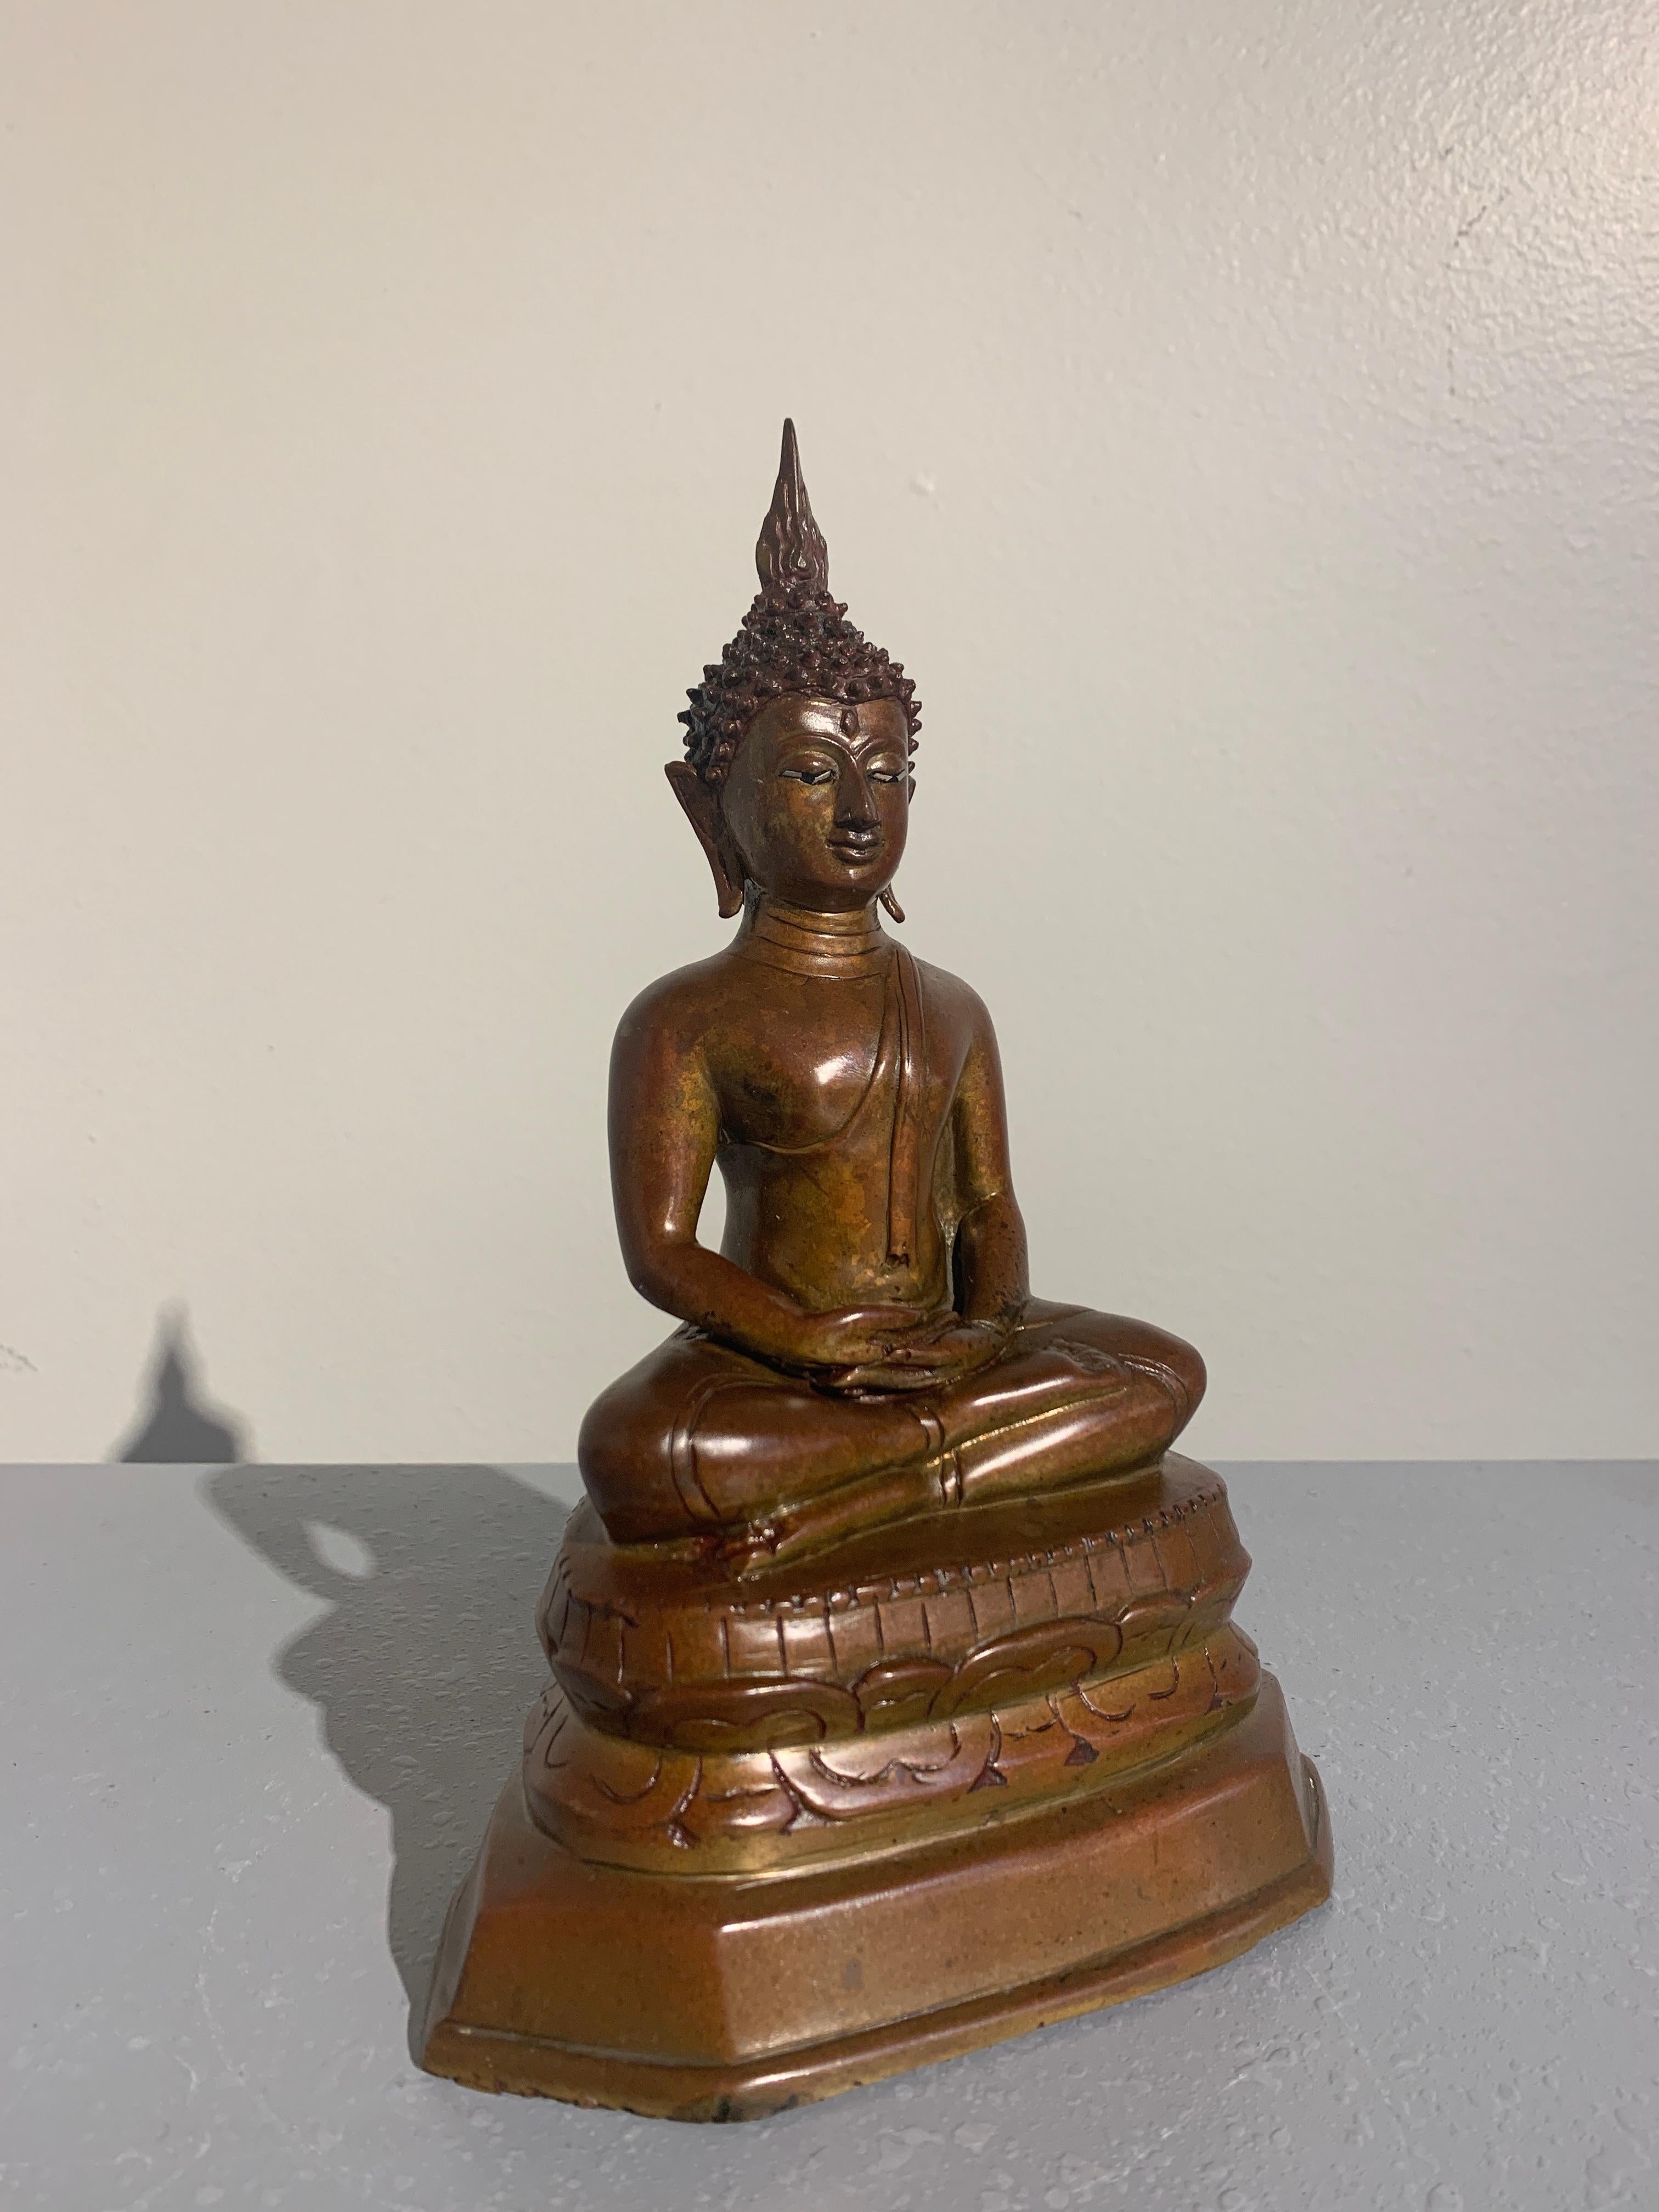 A lovely northern Thai cast bronze seated meditating Buddha statue with shell inlaid eyes, style of Wat Chedi Luang, Lan Na Kingdom, region of Chiang Mai, 15th-16th century. 

The statue of the historical Buddha, Shakyamuni, is portrayed in